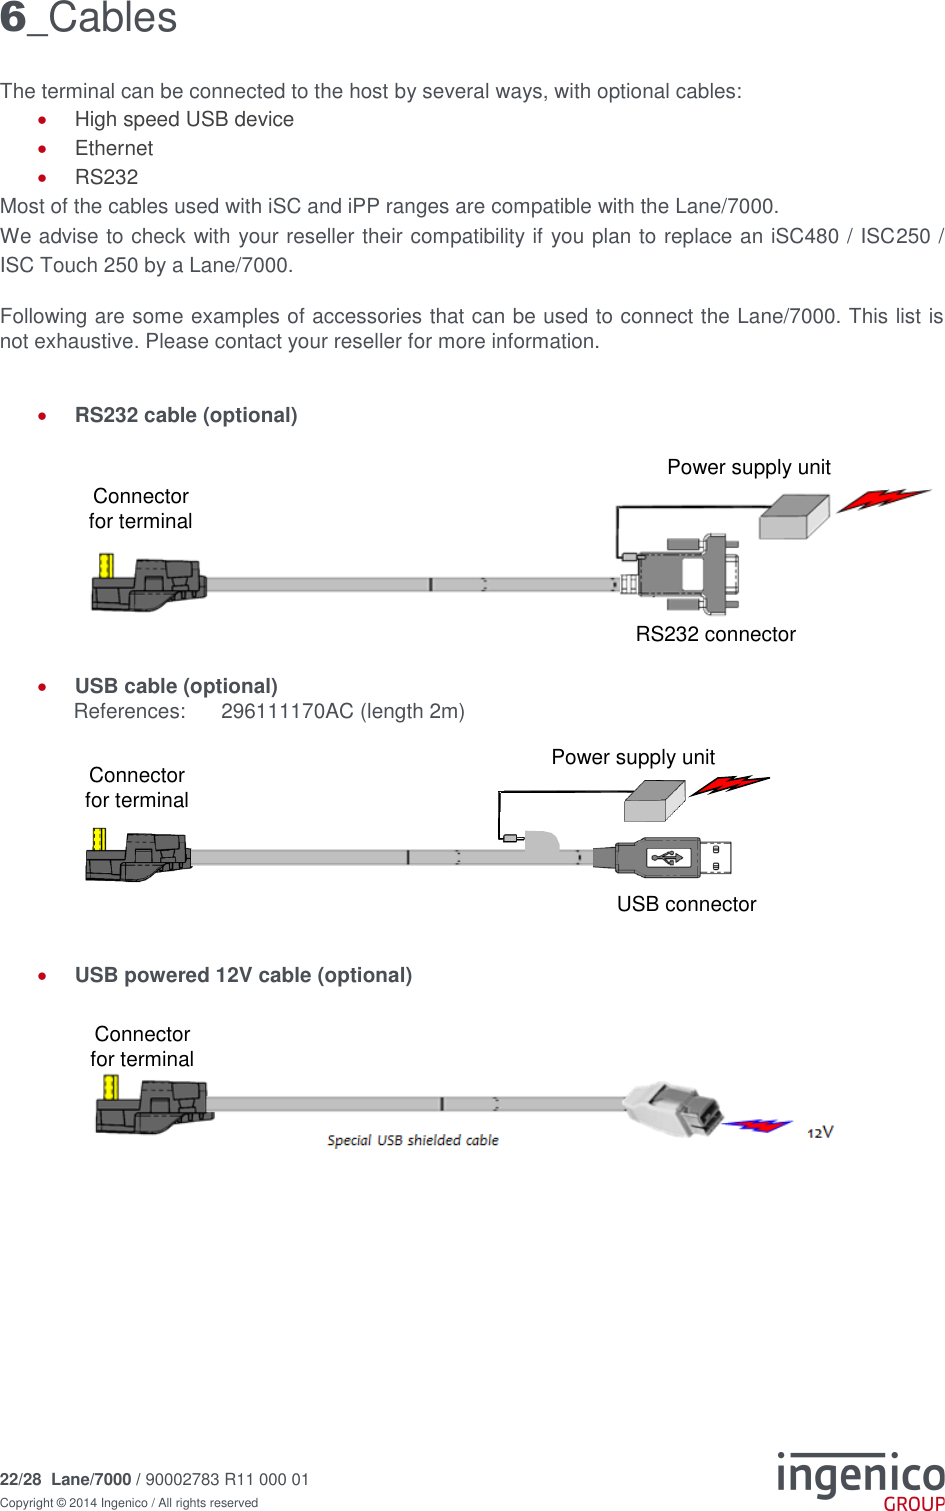  22/28  Lane/7000 / 90002783 R11 000 01 Copyright © 2014 Ingenico / All rights reserved   6_Cables The terminal can be connected to the host by several ways, with optional cables:  High speed USB device  Ethernet  RS232 Most of the cables used with iSC and iPP ranges are compatible with the Lane/7000.  We advise to check with your reseller their compatibility if you plan to replace an iSC480 / ISC250 / ISC Touch 250 by a Lane/7000.   Following are some examples of accessories that can be used to connect the Lane/7000. This list is not exhaustive. Please contact your reseller for more information.    RS232 cable (optional)         USB cable (optional)    References:   296111170AC (length 2m)        USB powered 12V cable (optional)            USB connector Connector for terminal Power supply unit RS232 connector Connector for terminal Power supply unit Connector for terminal 